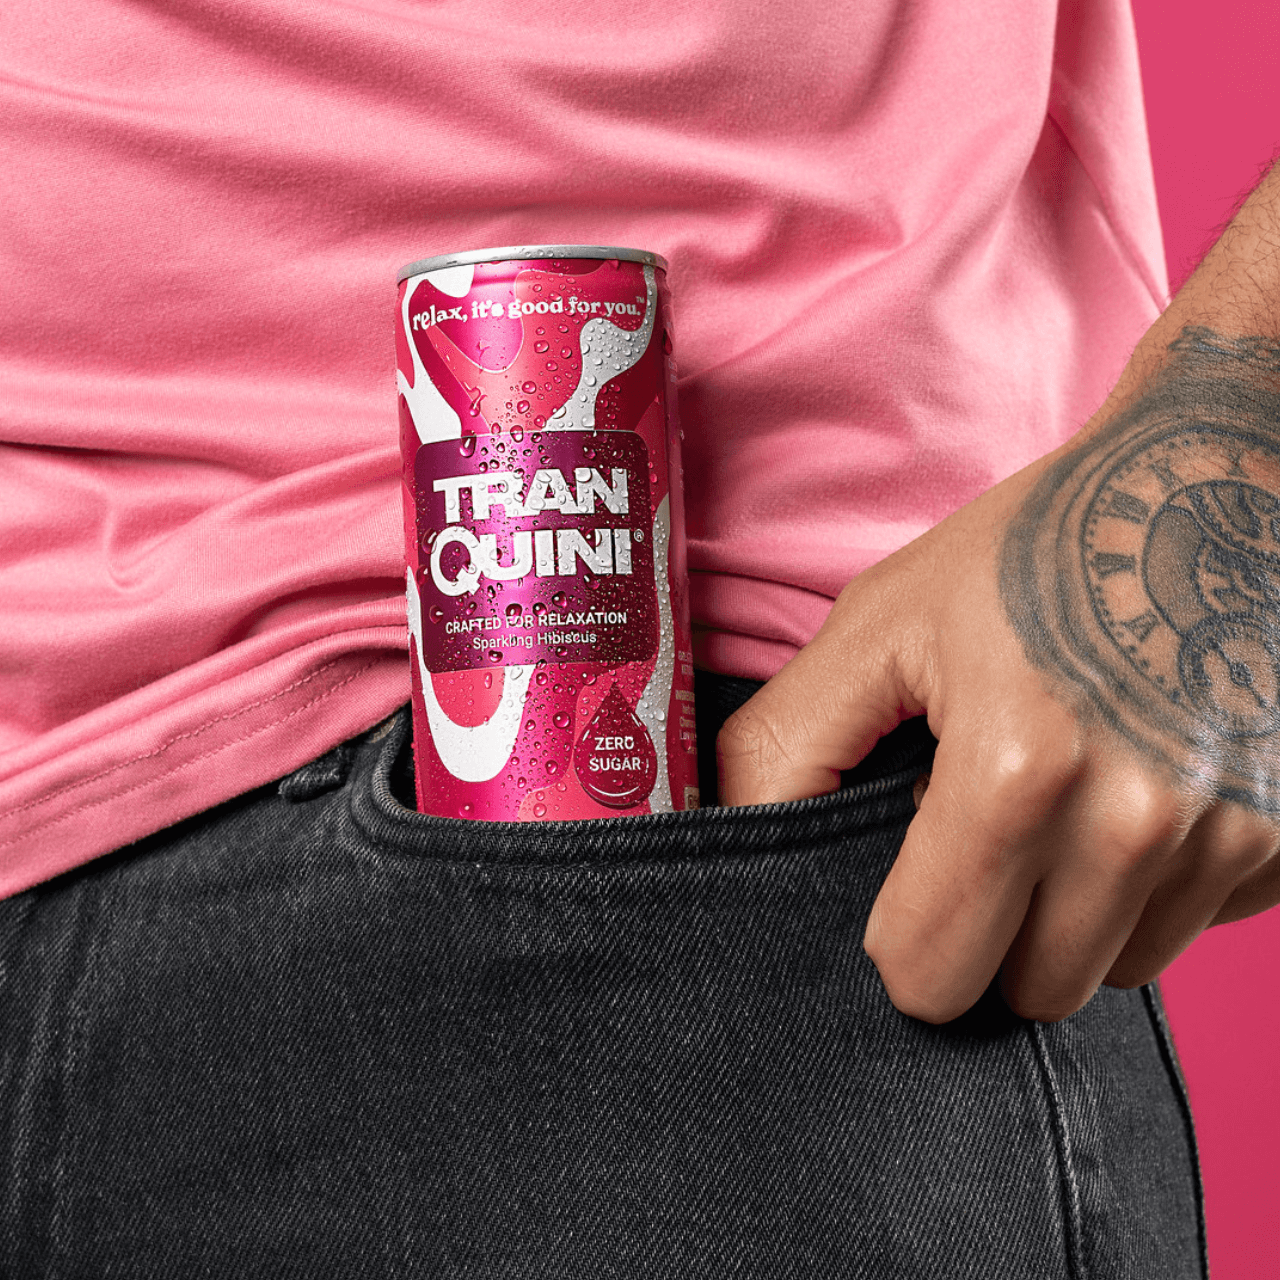 A person with a tattooed arm casually slips a pink can of "Tranquini" labeled "Zero Sugar" into their black jeans pocket. Wearing a coordinating pink shirt against a matching background, they showcase the can's label: "Relax, it's good for you." This scene radiates effortless style and ease, inviting you to join the subscription.